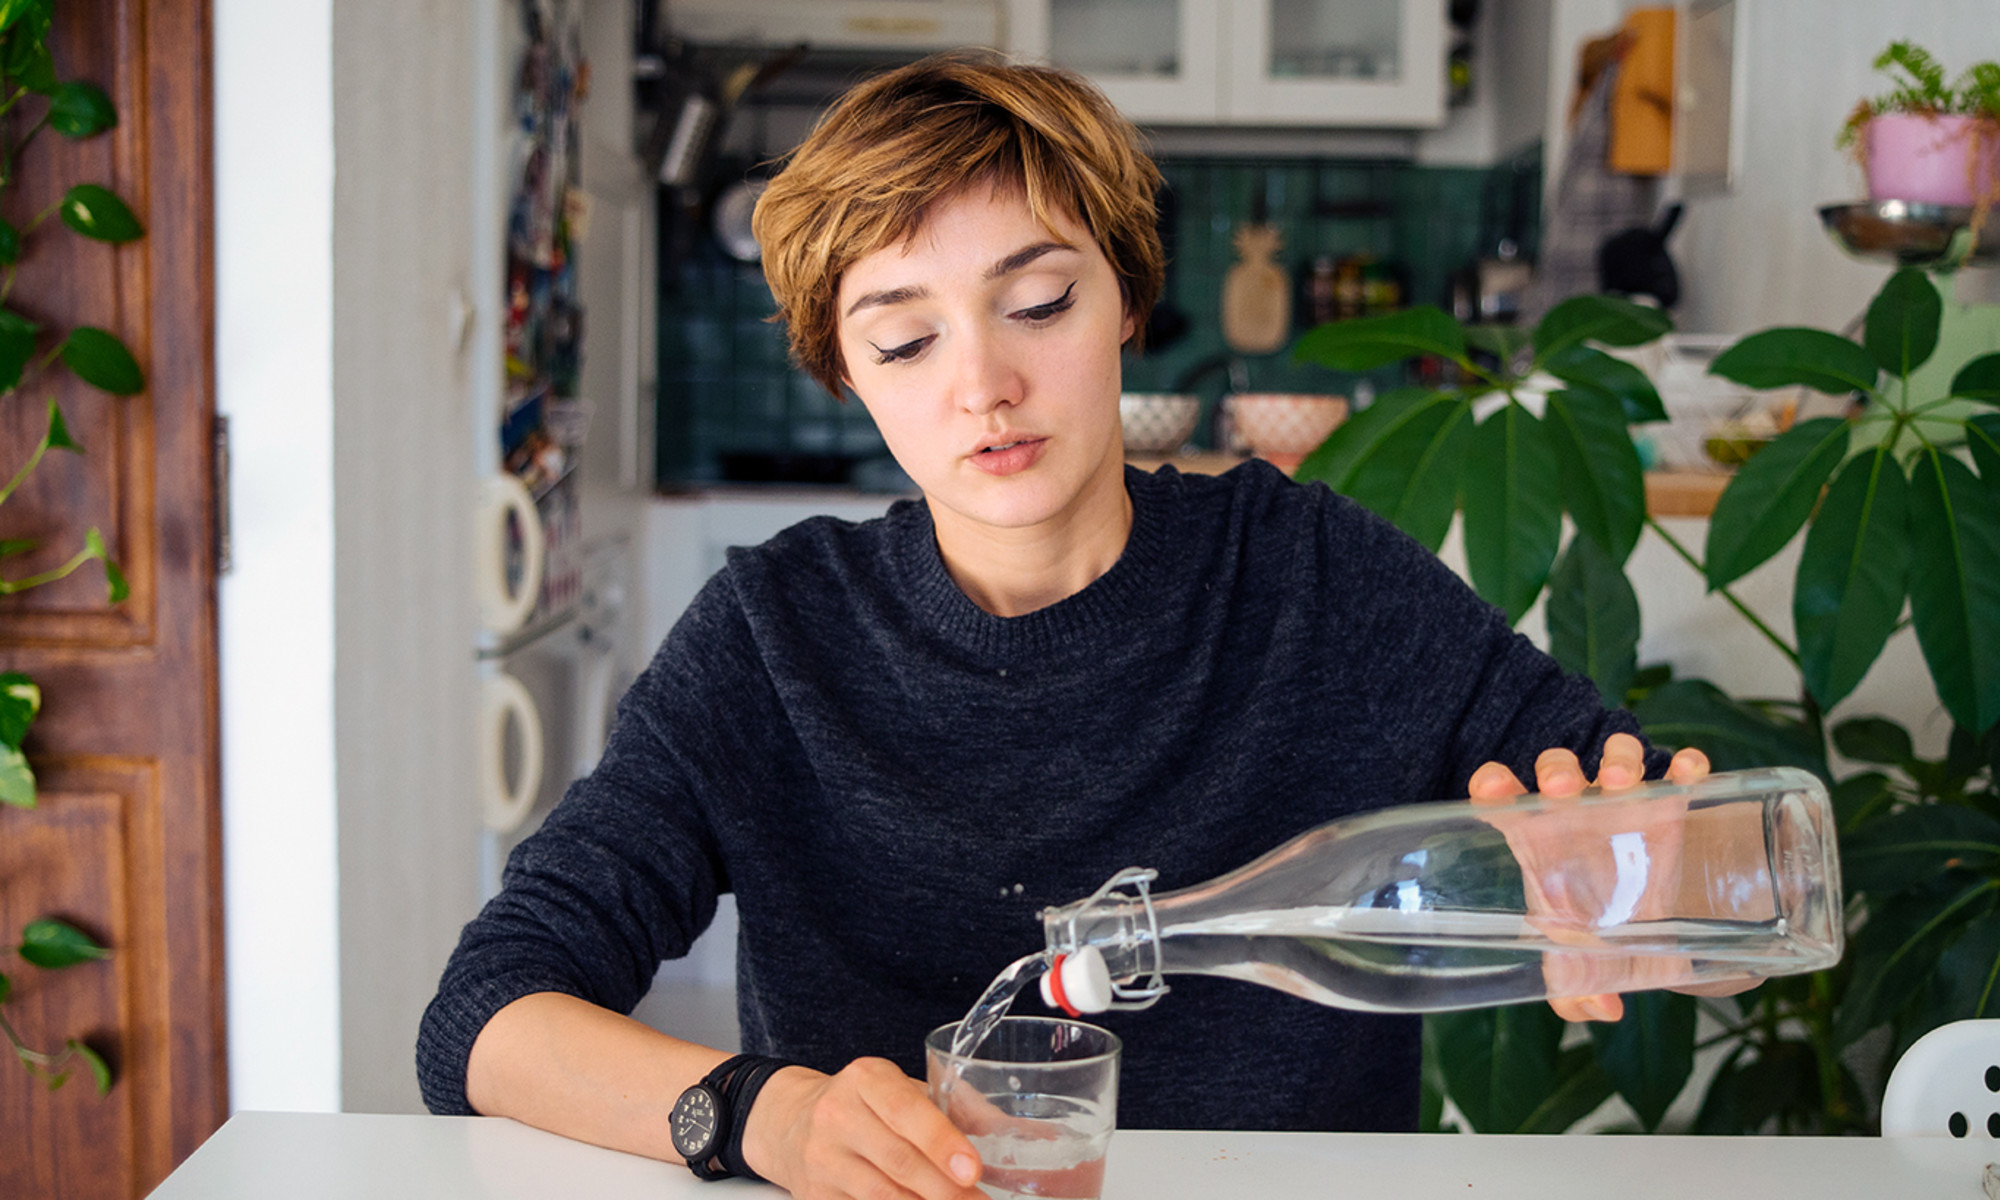 What Water Fasting Is - Safety, Dangers, According to Experts